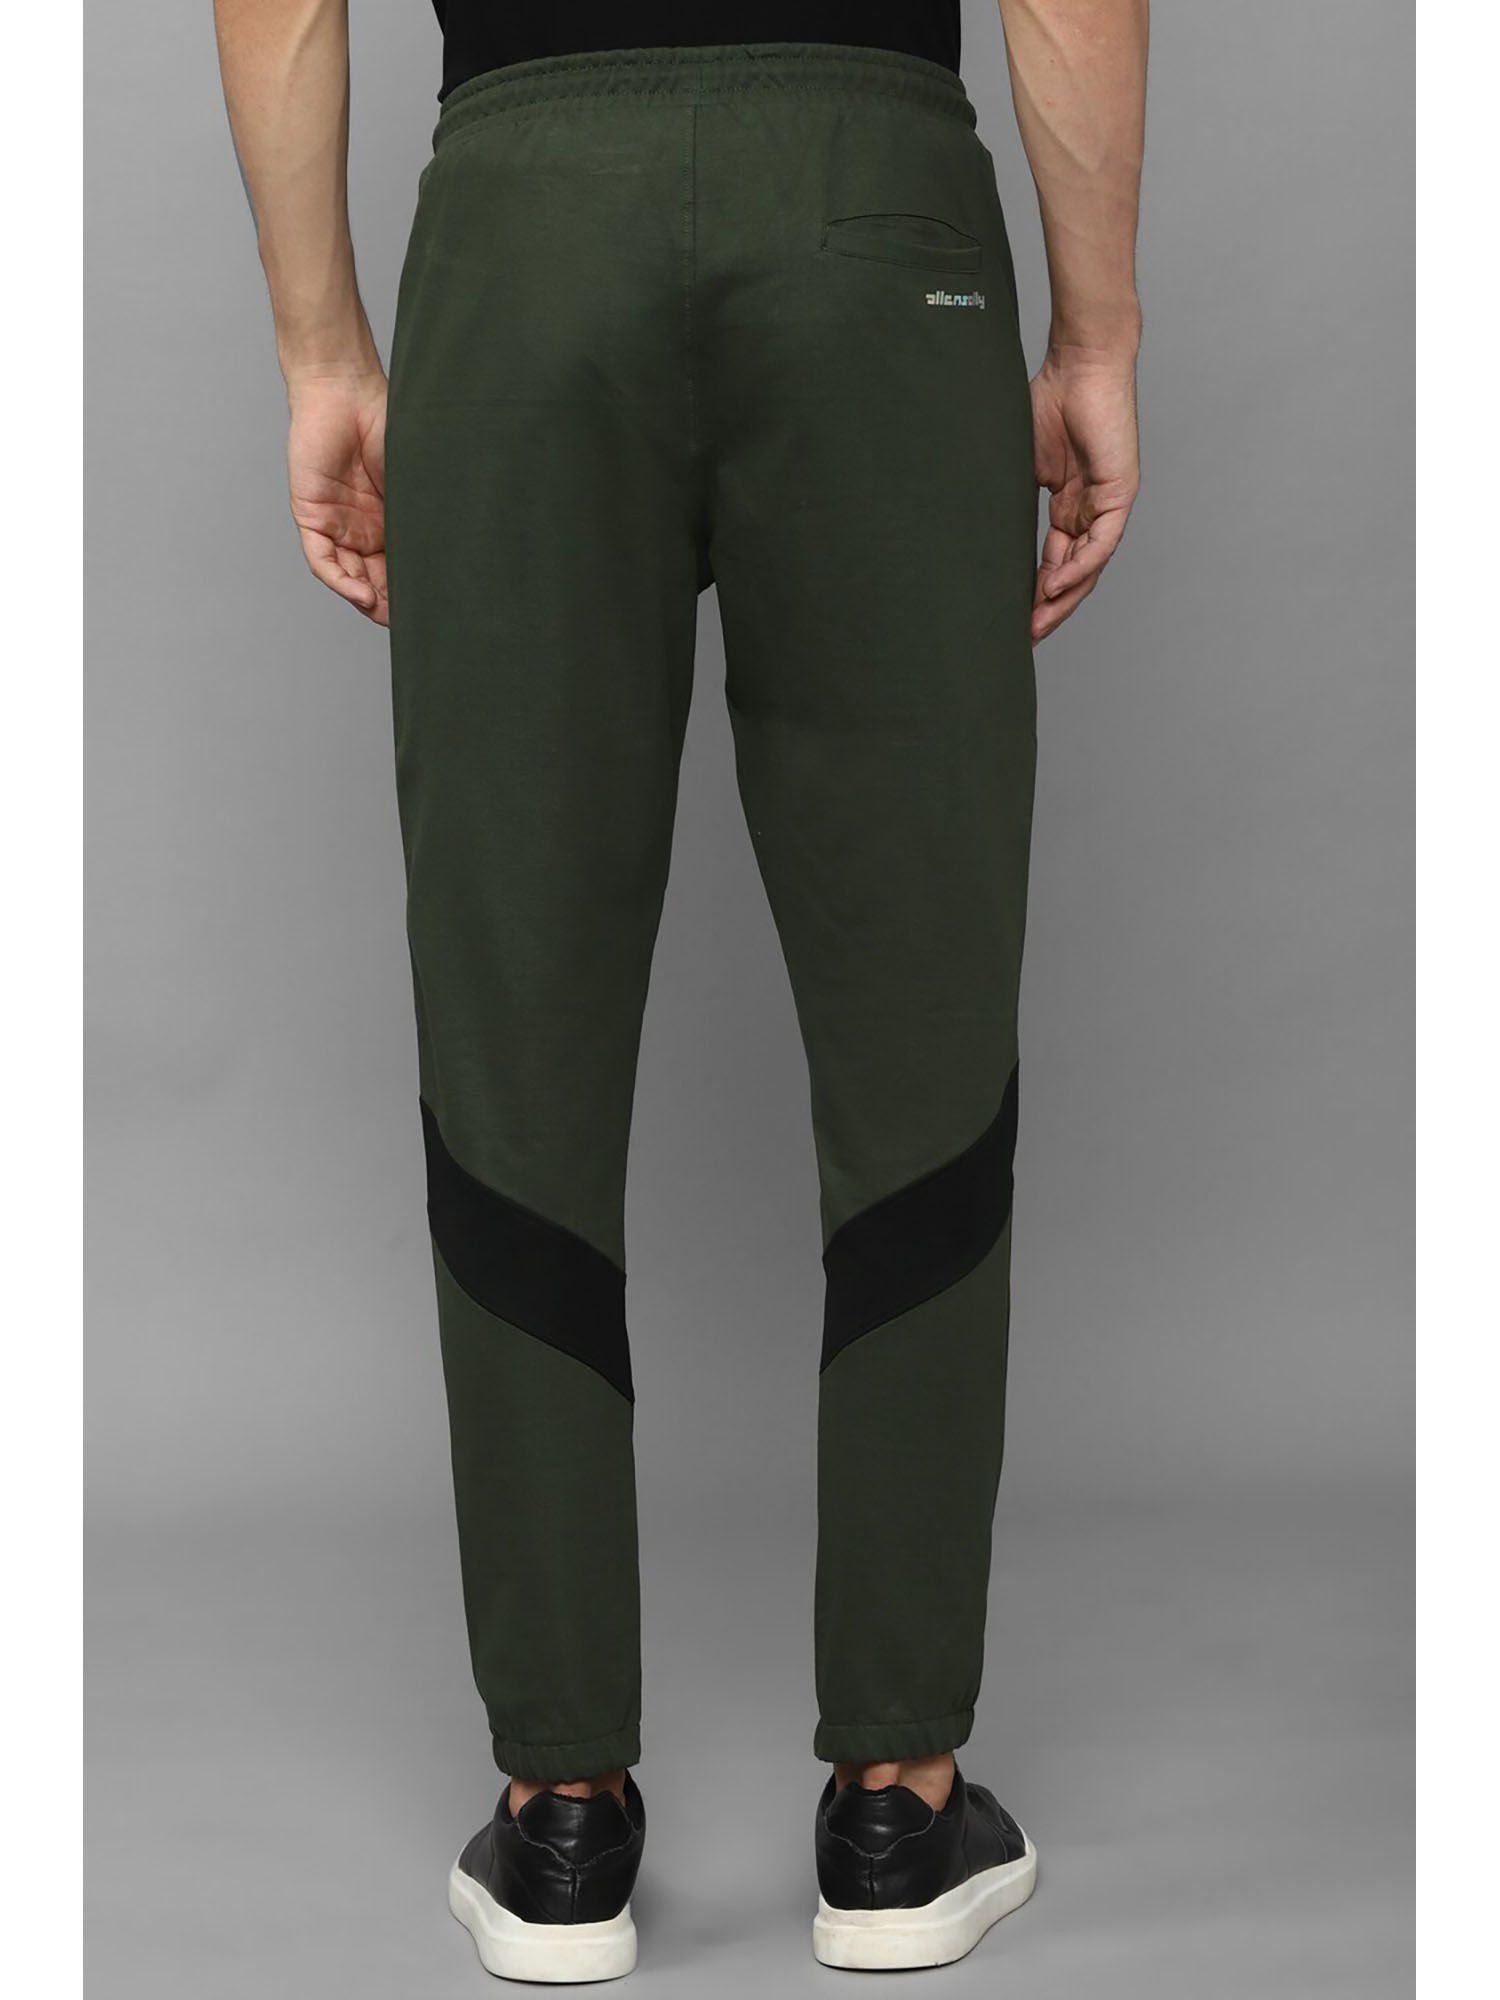 Allen Solly Tribe Solid Men Grey Track Pants - Buy Allen Solly Tribe Solid  Men Grey Track Pants Online at Best Prices in India | Flipkart.com